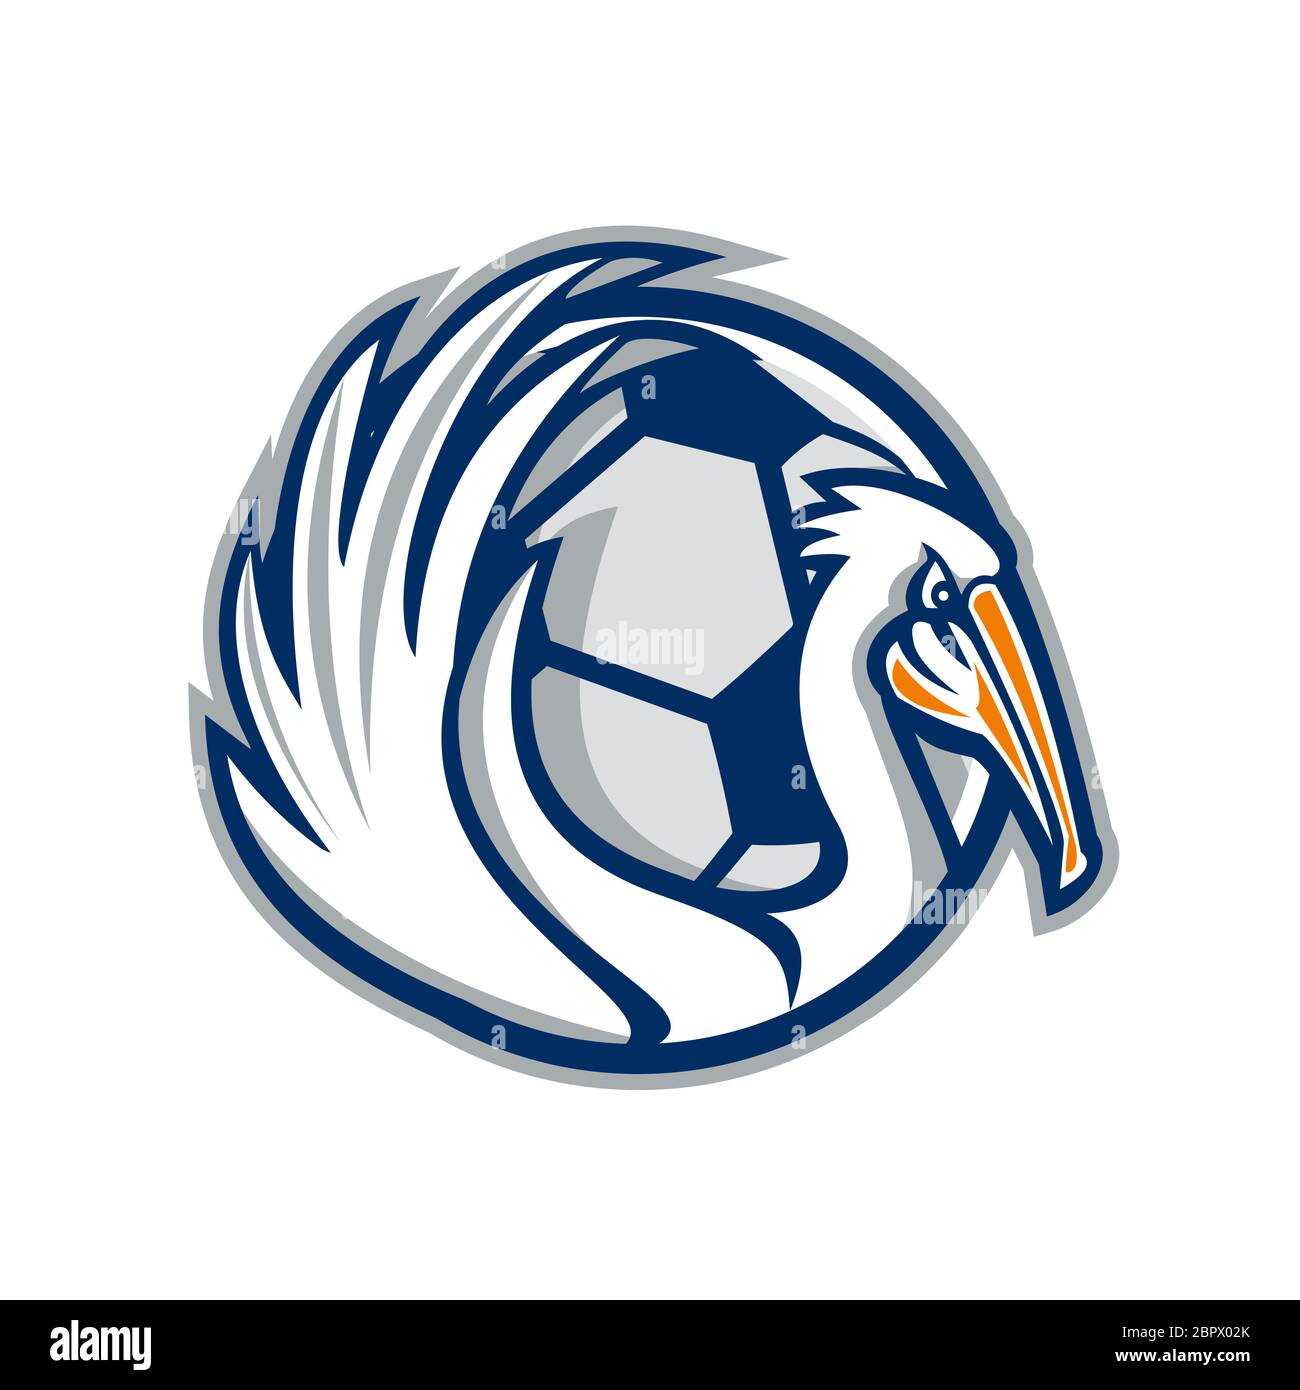 Illustration of a pelican showing its wings with soccer football ball in the background viewed from the side done in retro style. Stock Photo